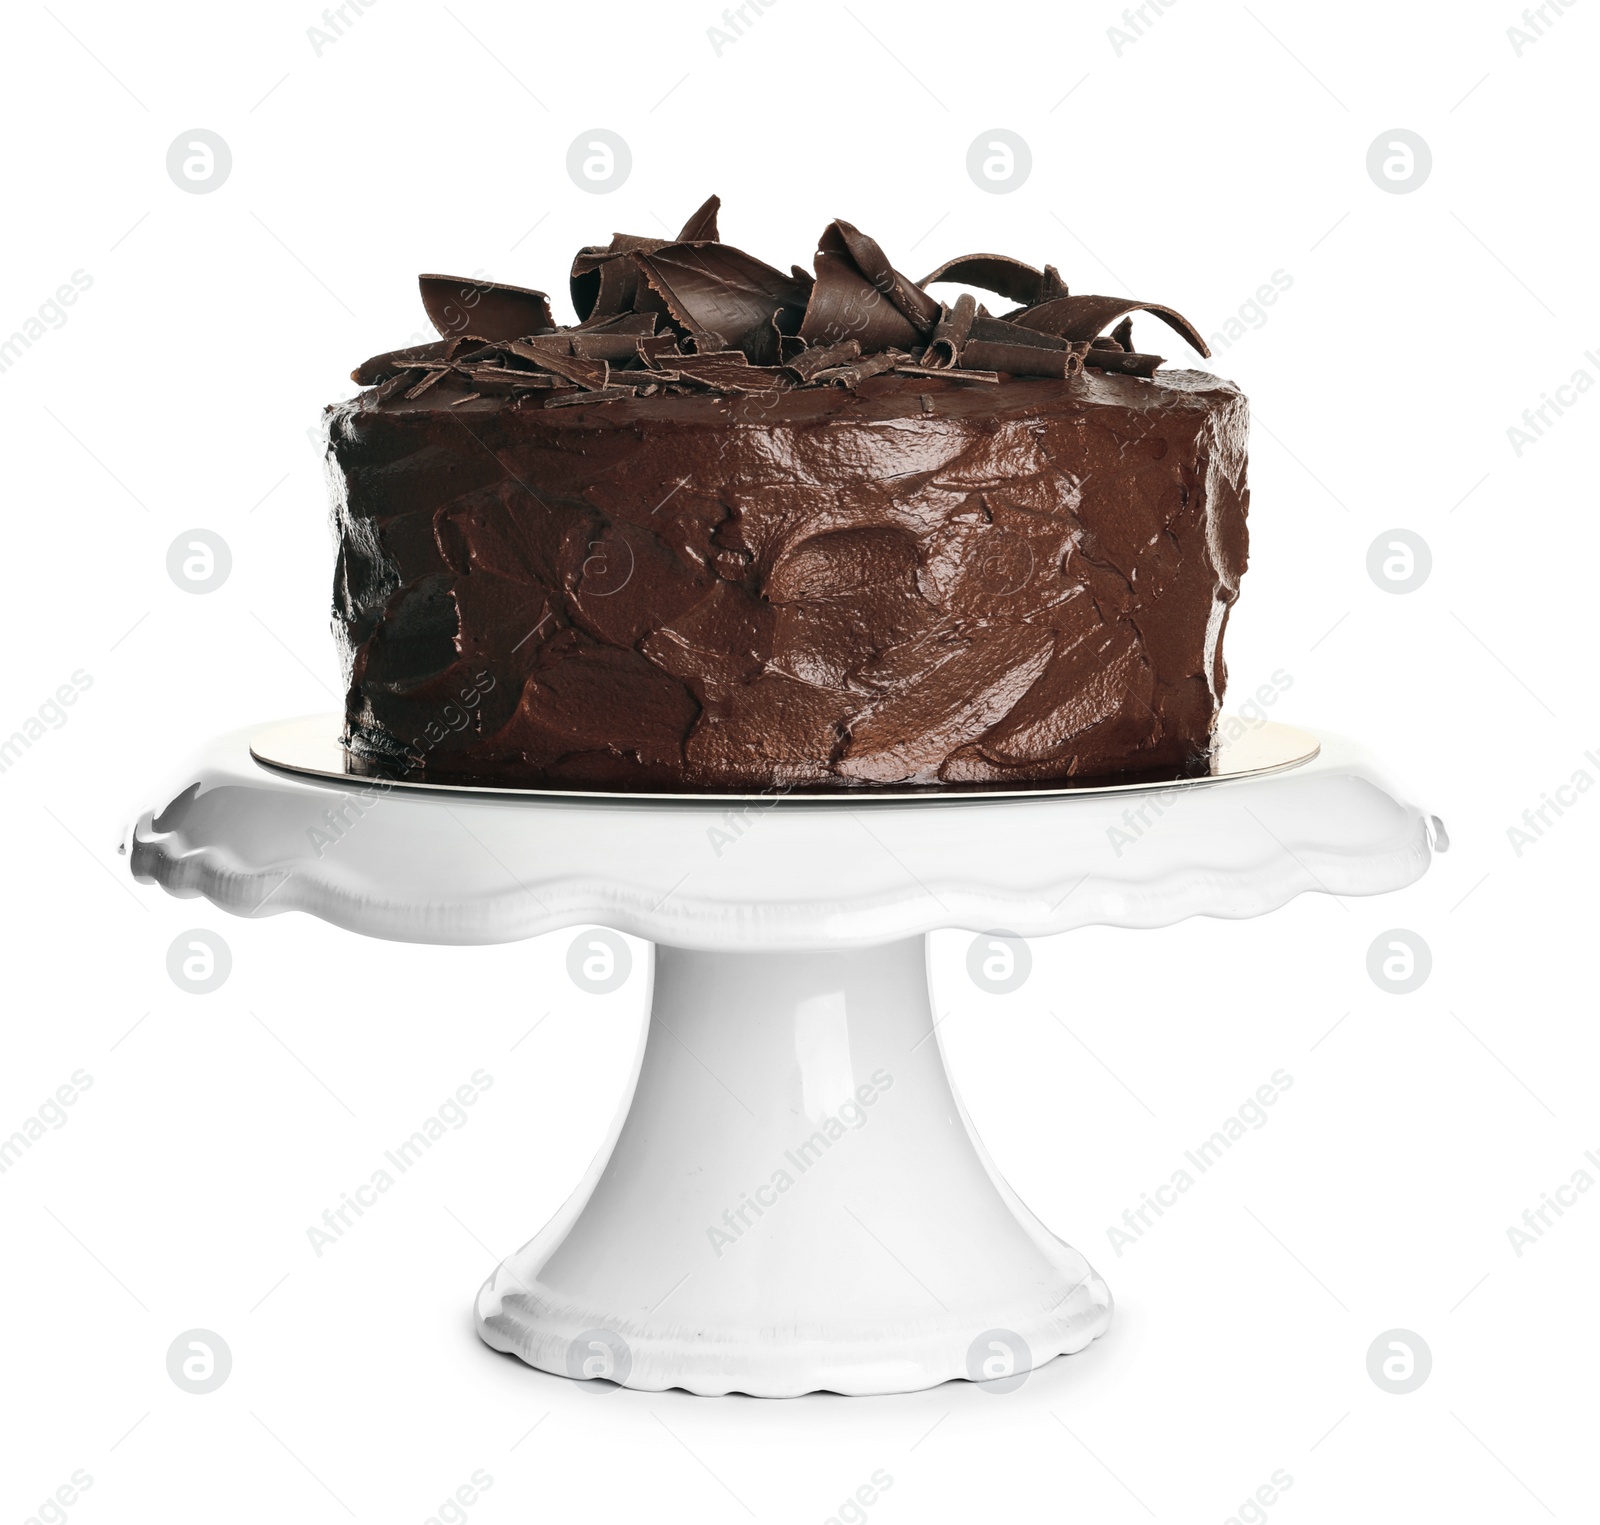 Photo of Stand with tasty homemade chocolate cake on white background